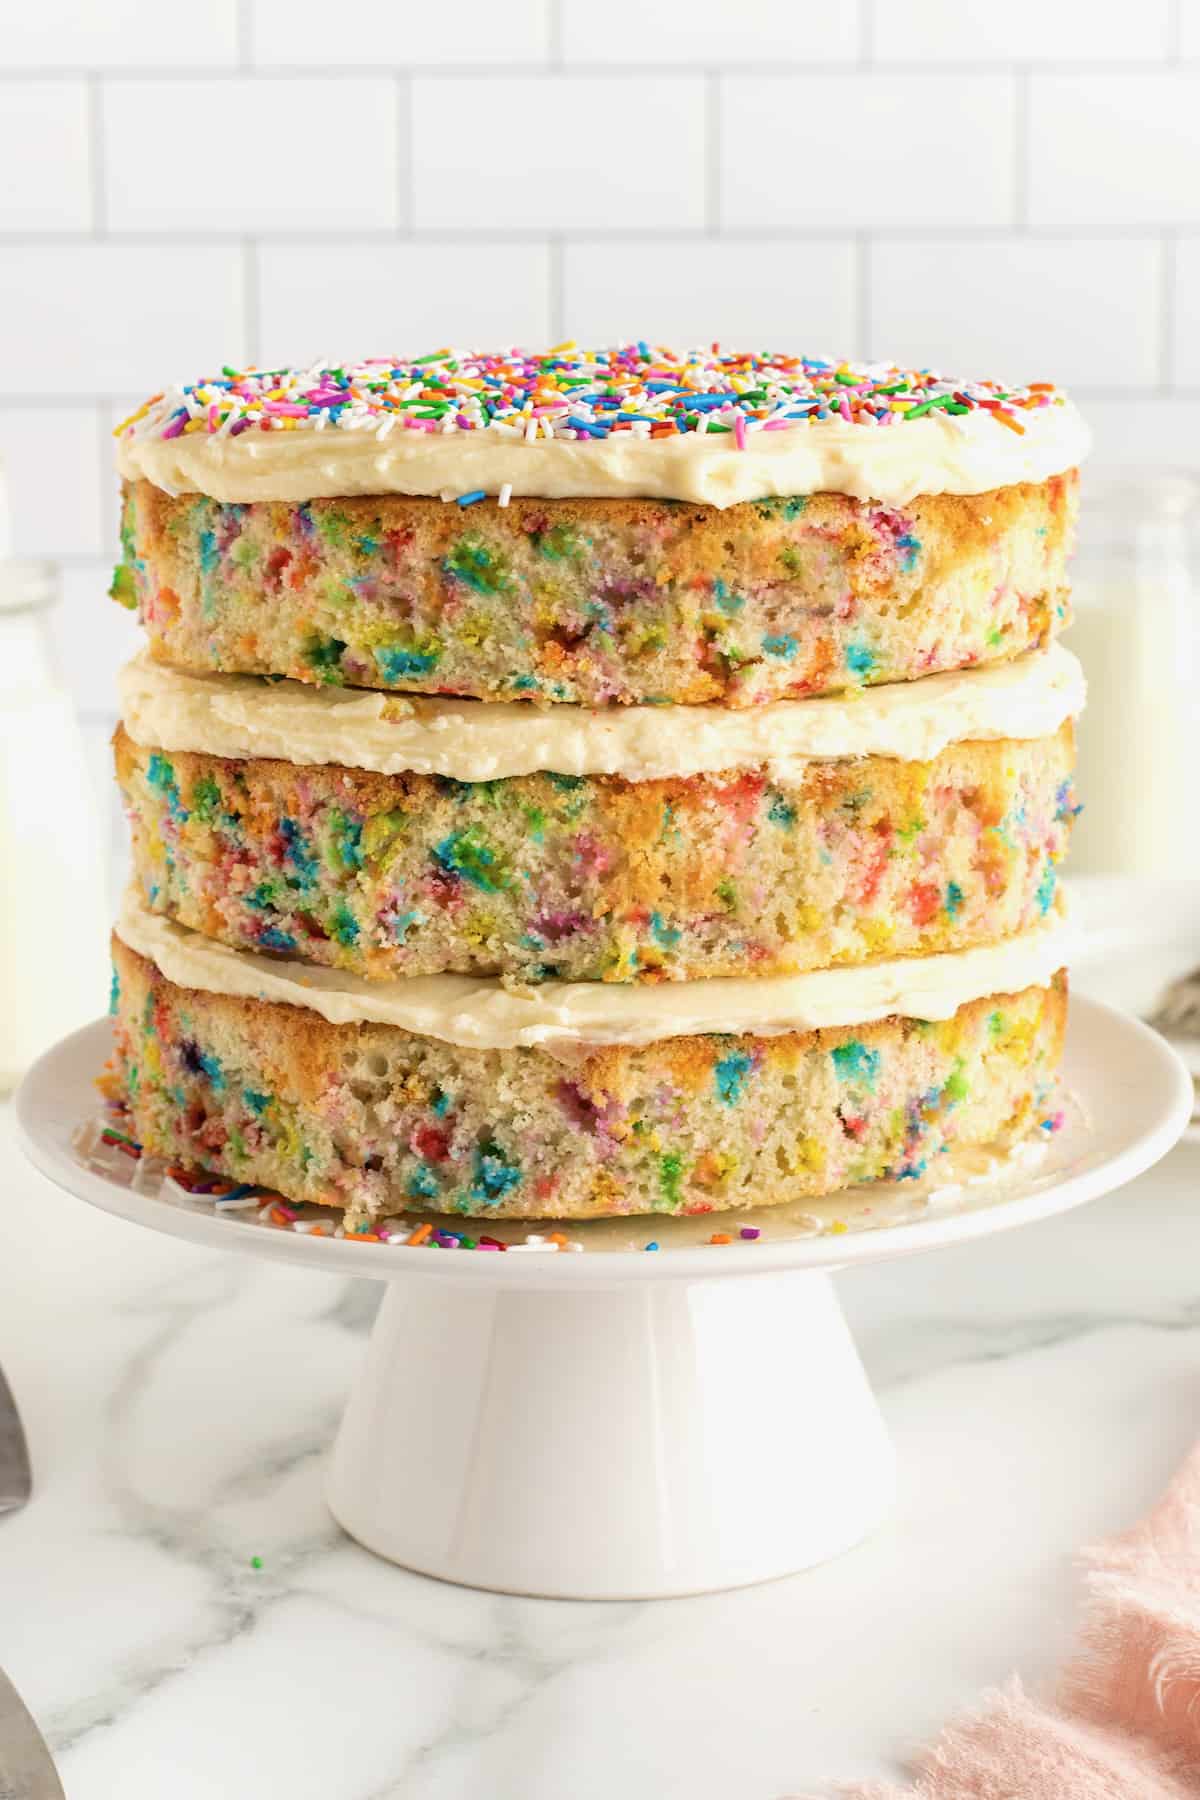 A white layer cake with rainbow sprinkles in the cake and white frosting on the top with more colorful sprinkles.